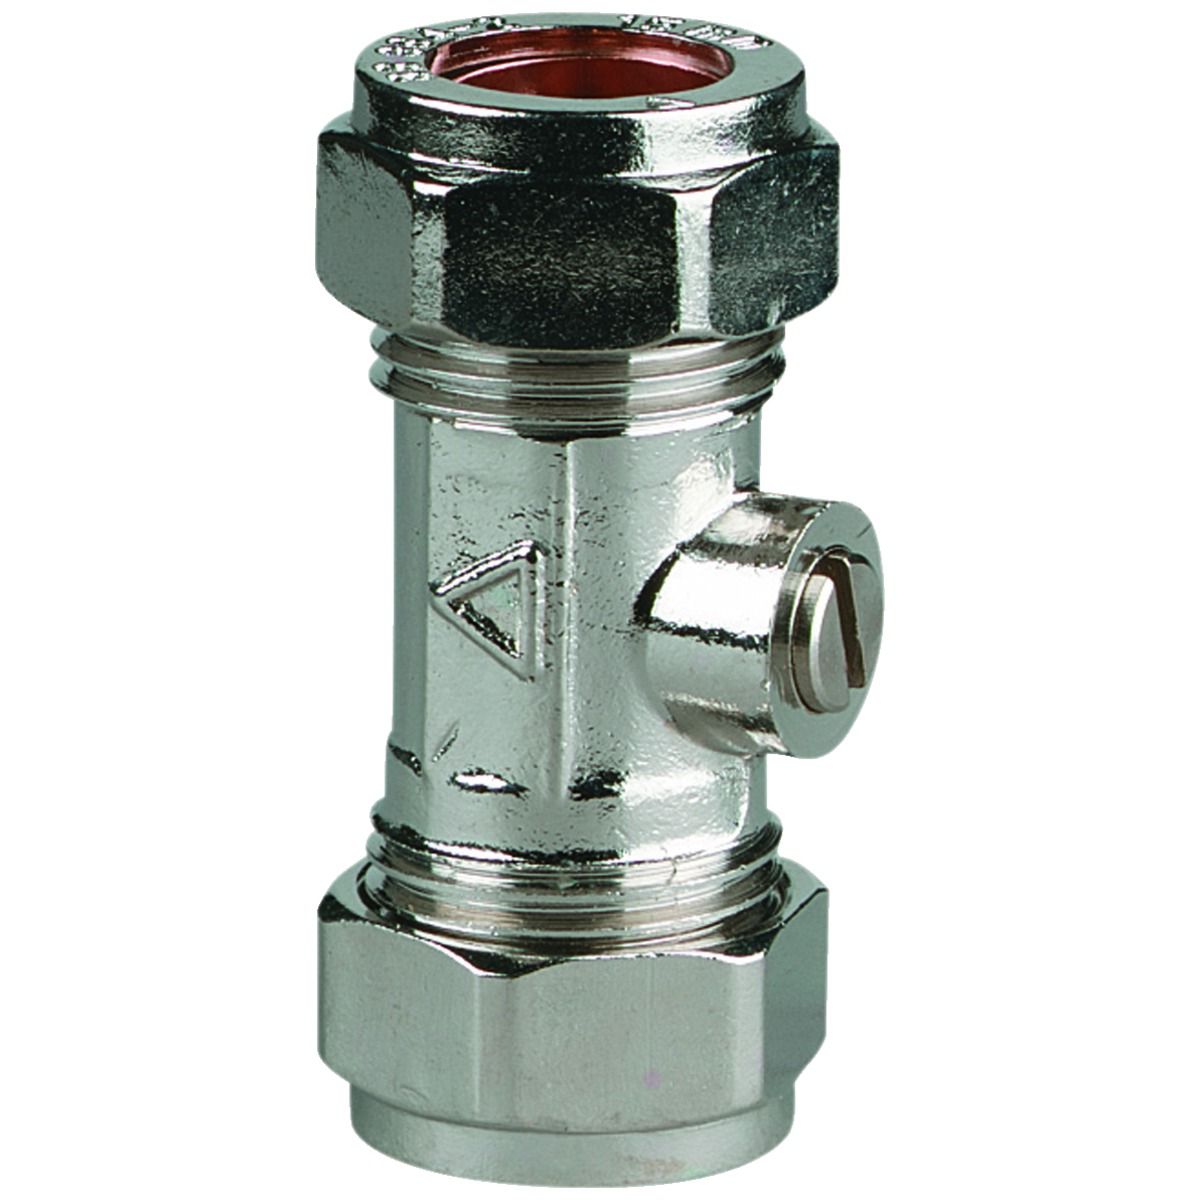 Image of Primaflow Chrome Plated Isolating Valve - 15mm Pack Of 10